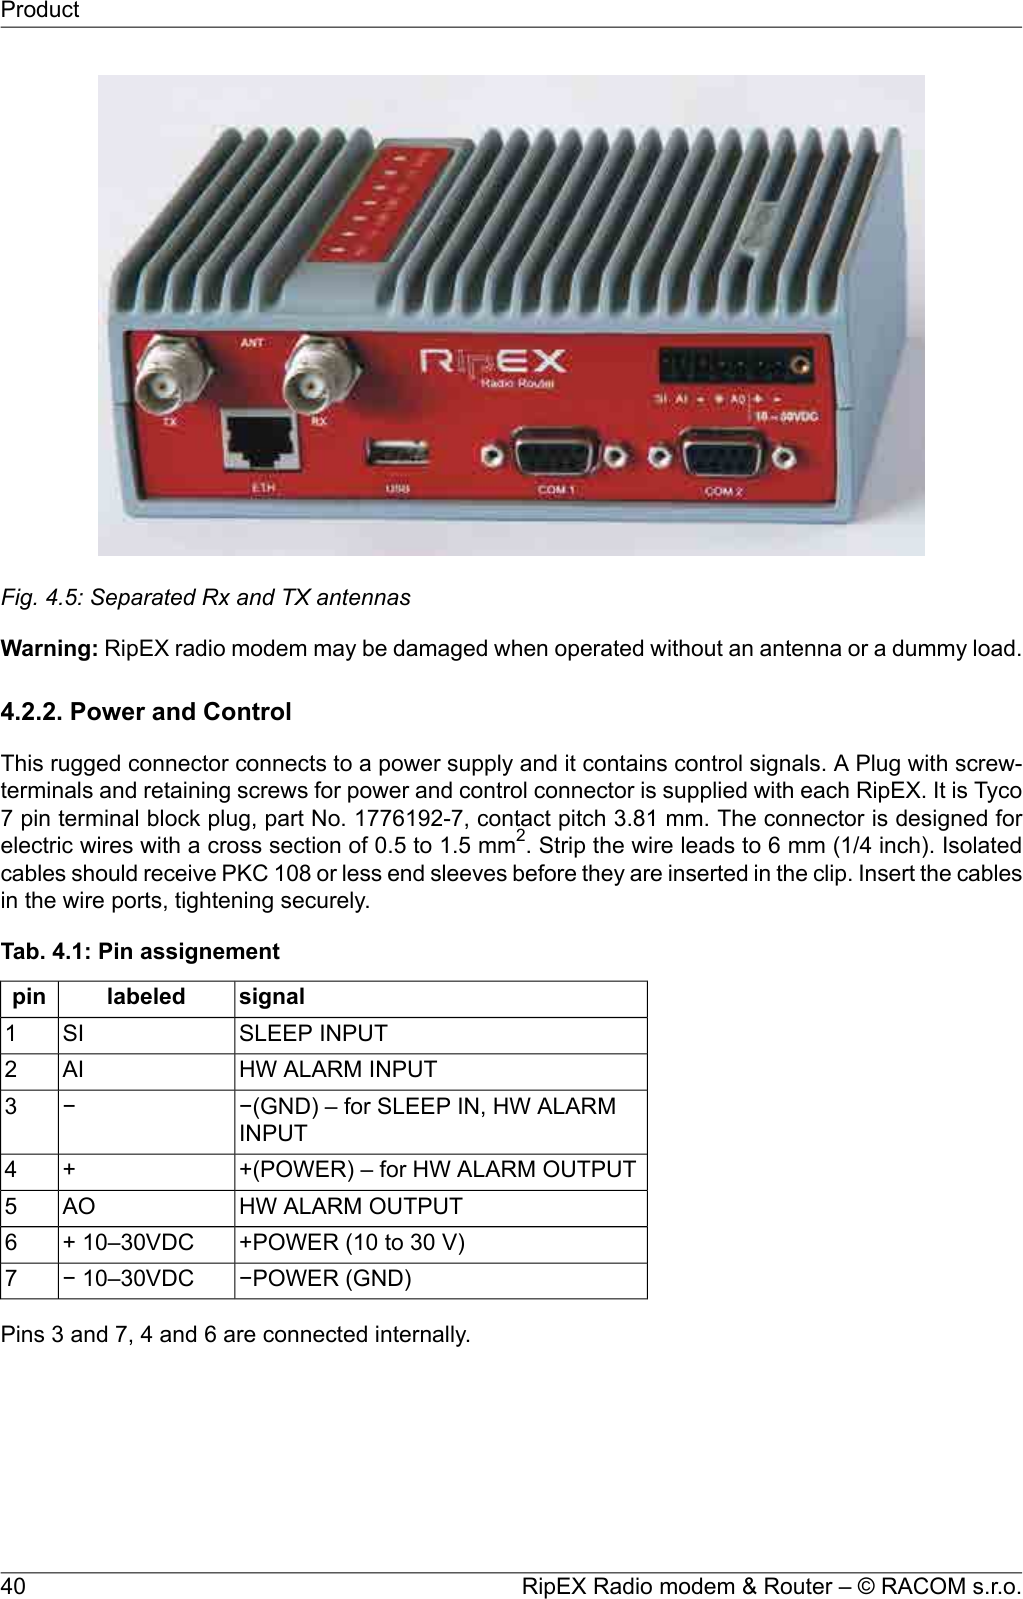 Fig. 4.5: Separated Rx and TX antennasWarning: RipEX radio modem may be damaged when operated without an antenna or a dummy load.4.2.2. Power and ControlThis rugged connector connects to a power supply and it contains control signals. A Plug with screw-terminals and retaining screws for power and control connector is supplied with each RipEX. It is Tyco7 pin terminal block plug, part No. 1776192-7, contact pitch 3.81 mm. The connector is designed forelectric wires with a cross section of 0.5 to 1.5 mm2. Strip the wire leads to 6 mm (1/4 inch). Isolatedcables should receive PKC 108 or less end sleeves before they are inserted in the clip. Insert the cablesin the wire ports, tightening securely.Tab. 4.1: Pin assignementsignallabeledpinSLEEP INPUTSI1HW ALARM INPUTAI2−(GND) – for SLEEP IN, HW ALARMINPUT−3+(POWER) – for HW ALARM OUTPUT+4HW ALARM OUTPUTAO5+POWER (10 to 30 V)+ 10–30VDC6−POWER (GND)− 10–30VDC7Pins 3 and 7, 4 and 6 are connected internally.RipEX Radio modem &amp; Router – © RACOM s.r.o.40Product